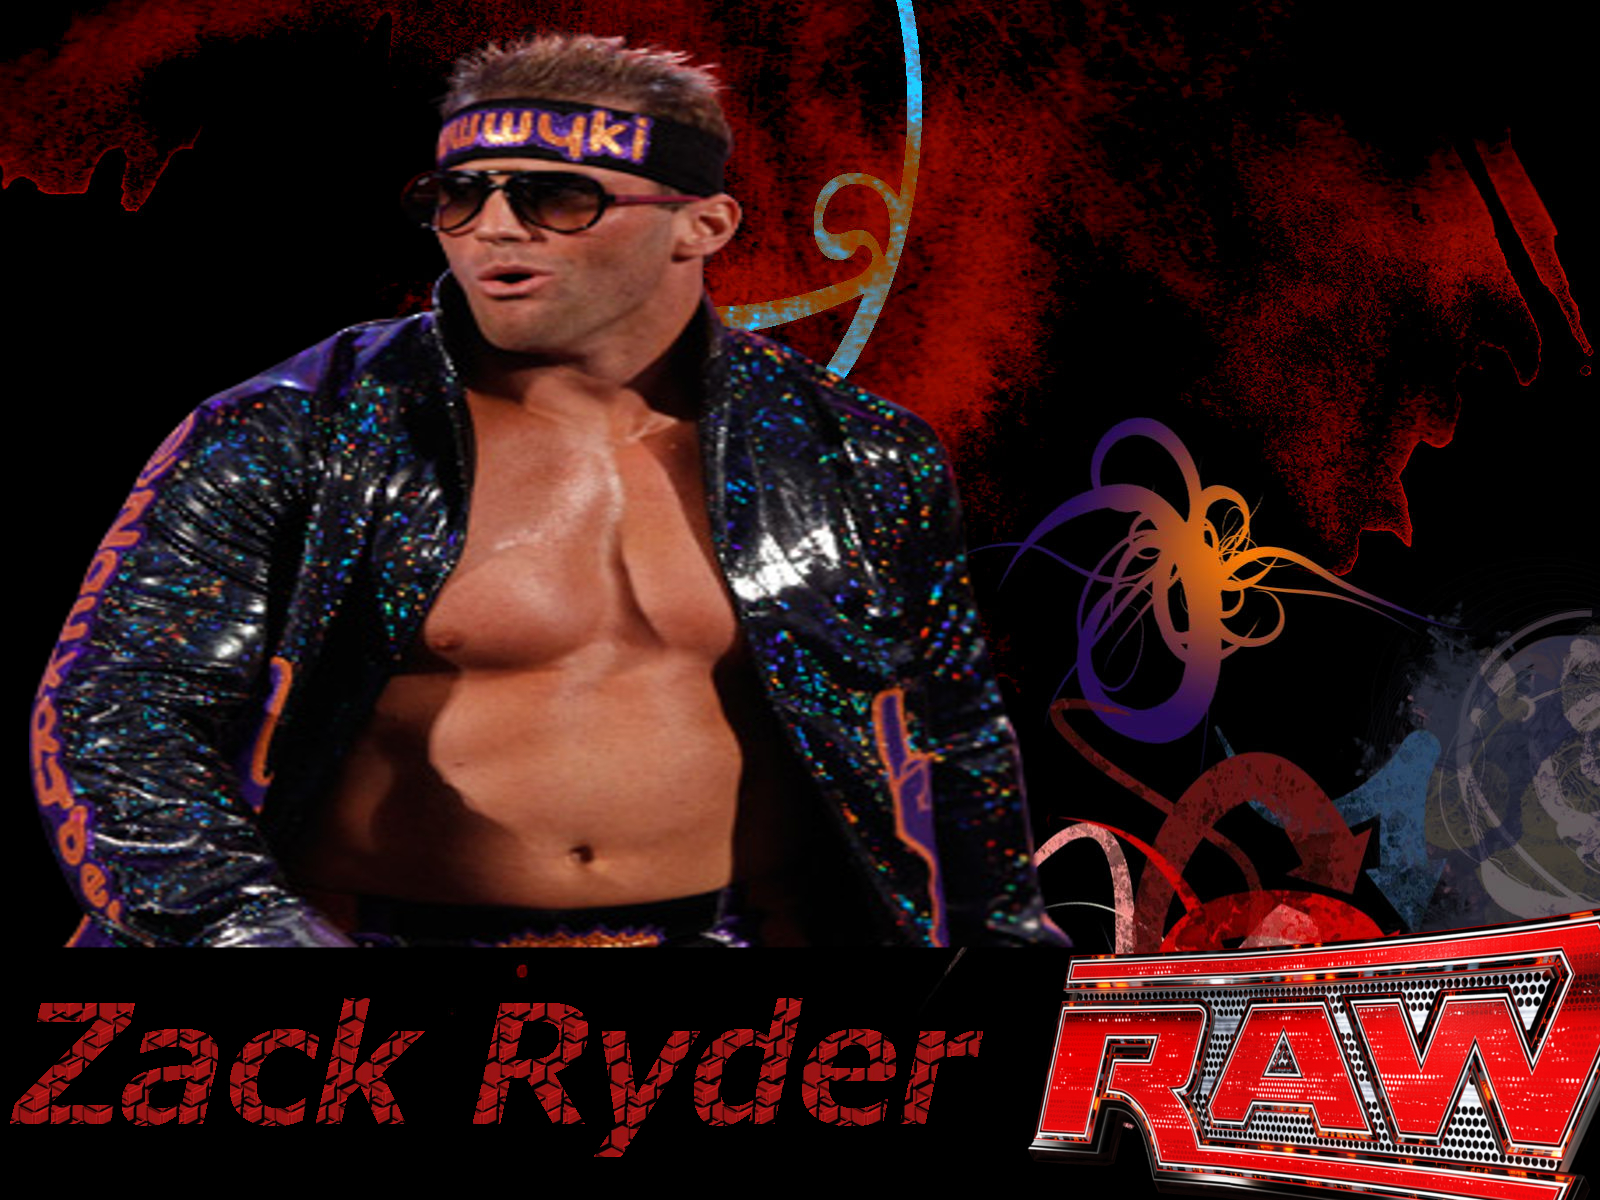 Related Posts : Zack Ryder Wallpaper.